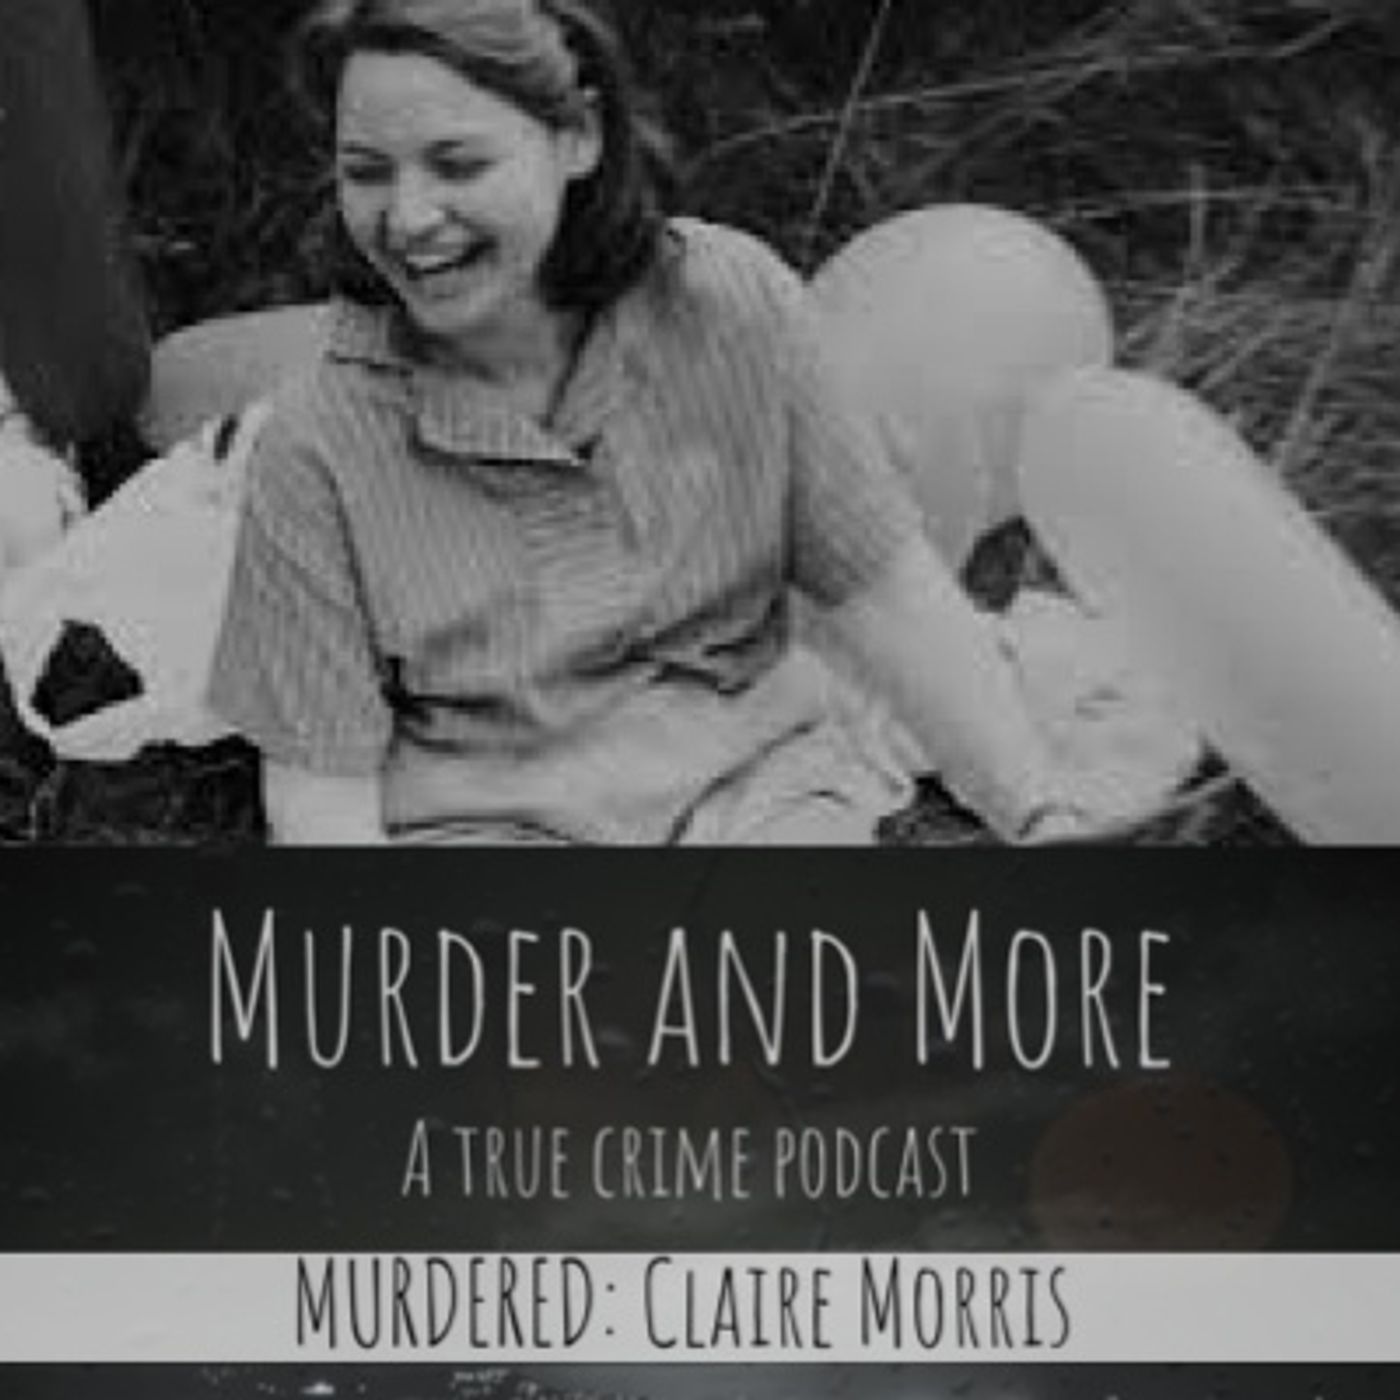 MURDERED: Claire Morris